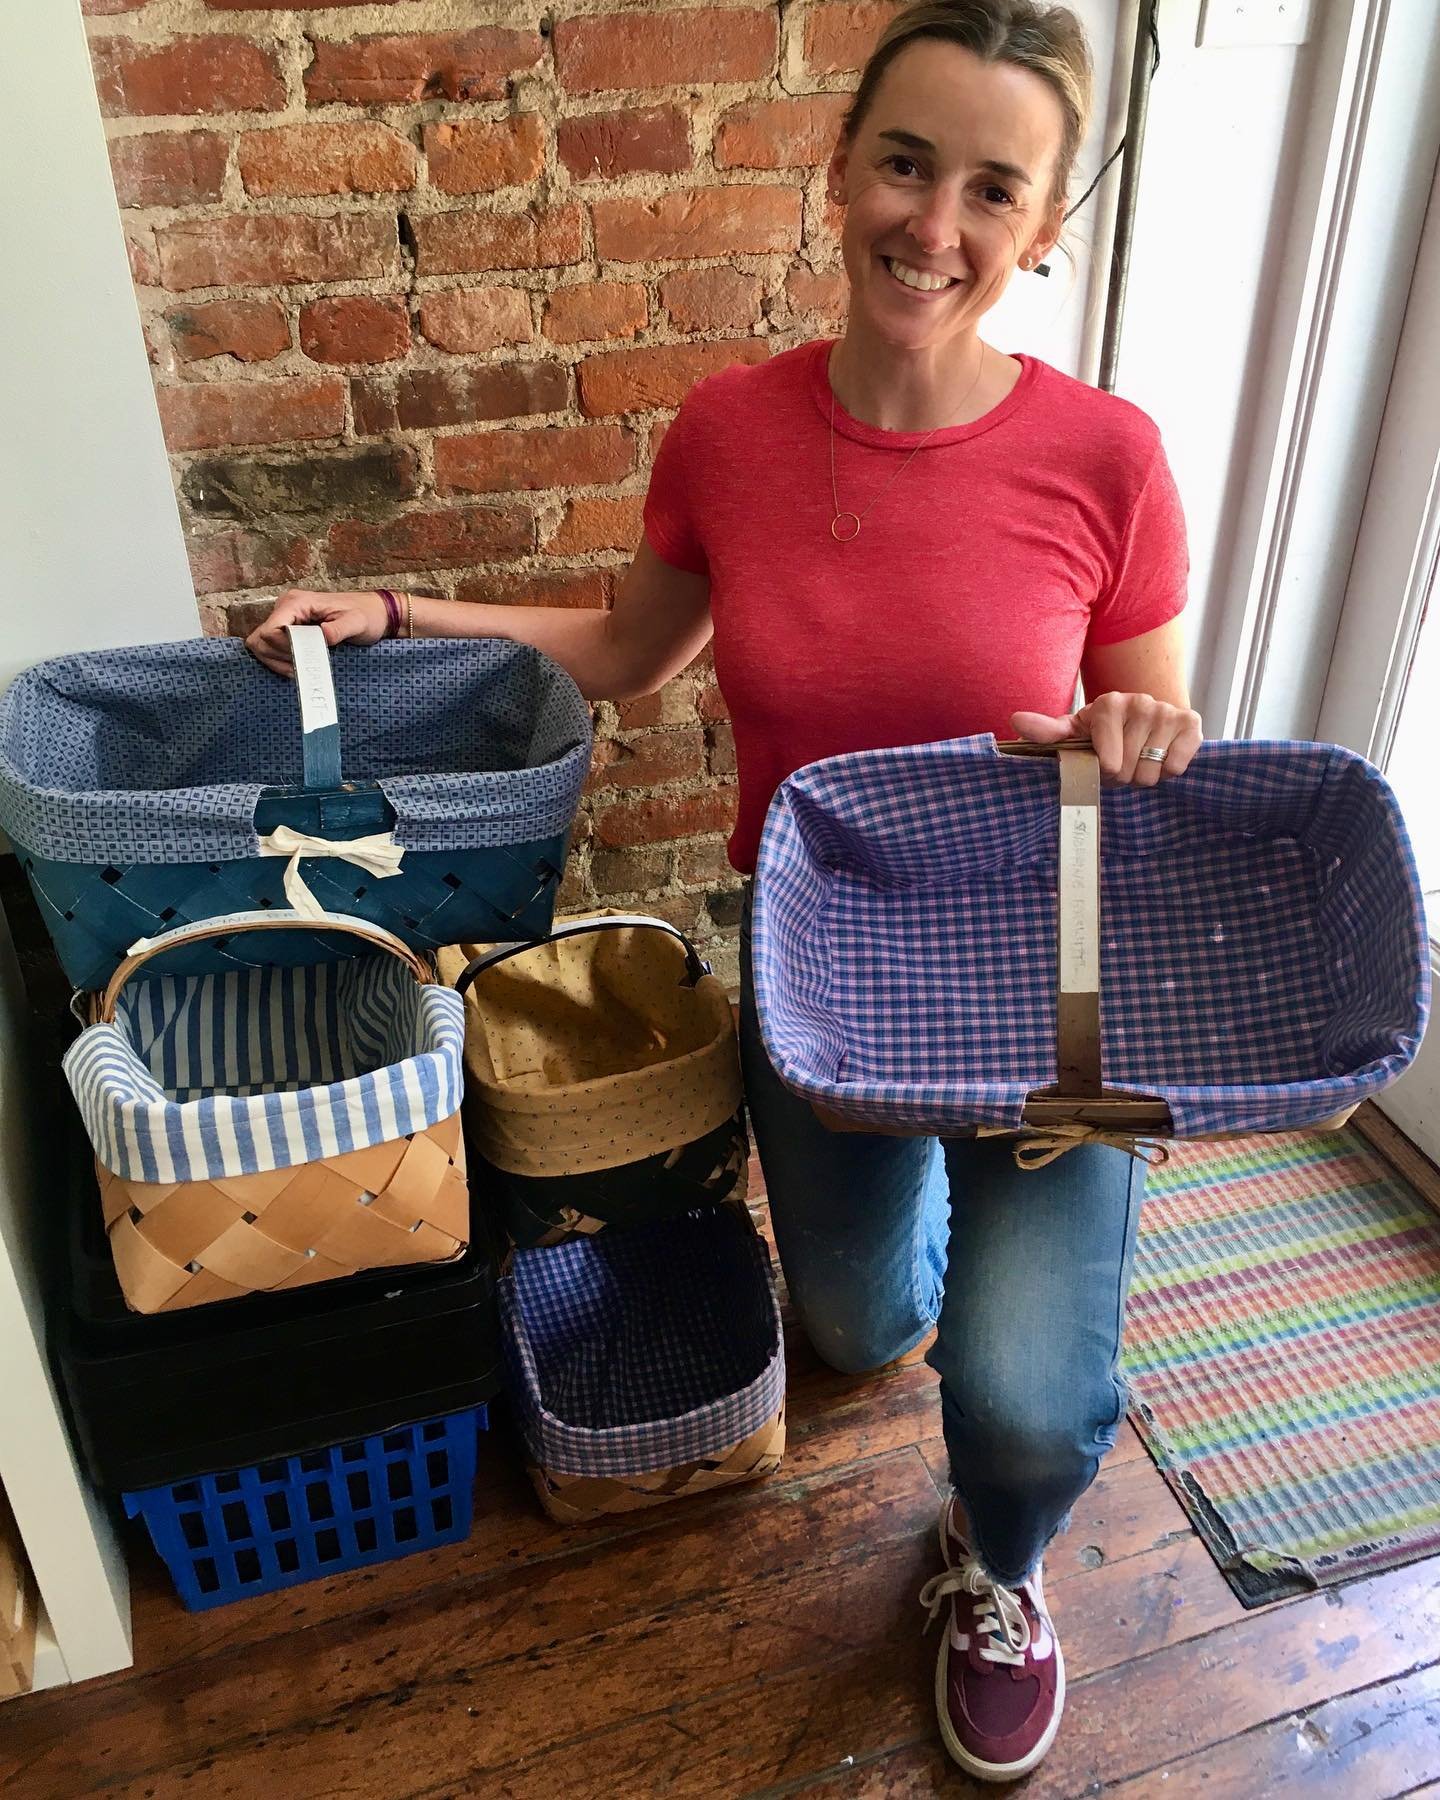 Our shopping baskets got a makeover thanks to the sewing skills of our rockstar volunteer @eileen.aber 🤩🧺 All of the fabric was sourced from our shop. 🙌

Now you don&rsquo;t have to worry about your creative tinies (pom poms, beads, etc) slipping 